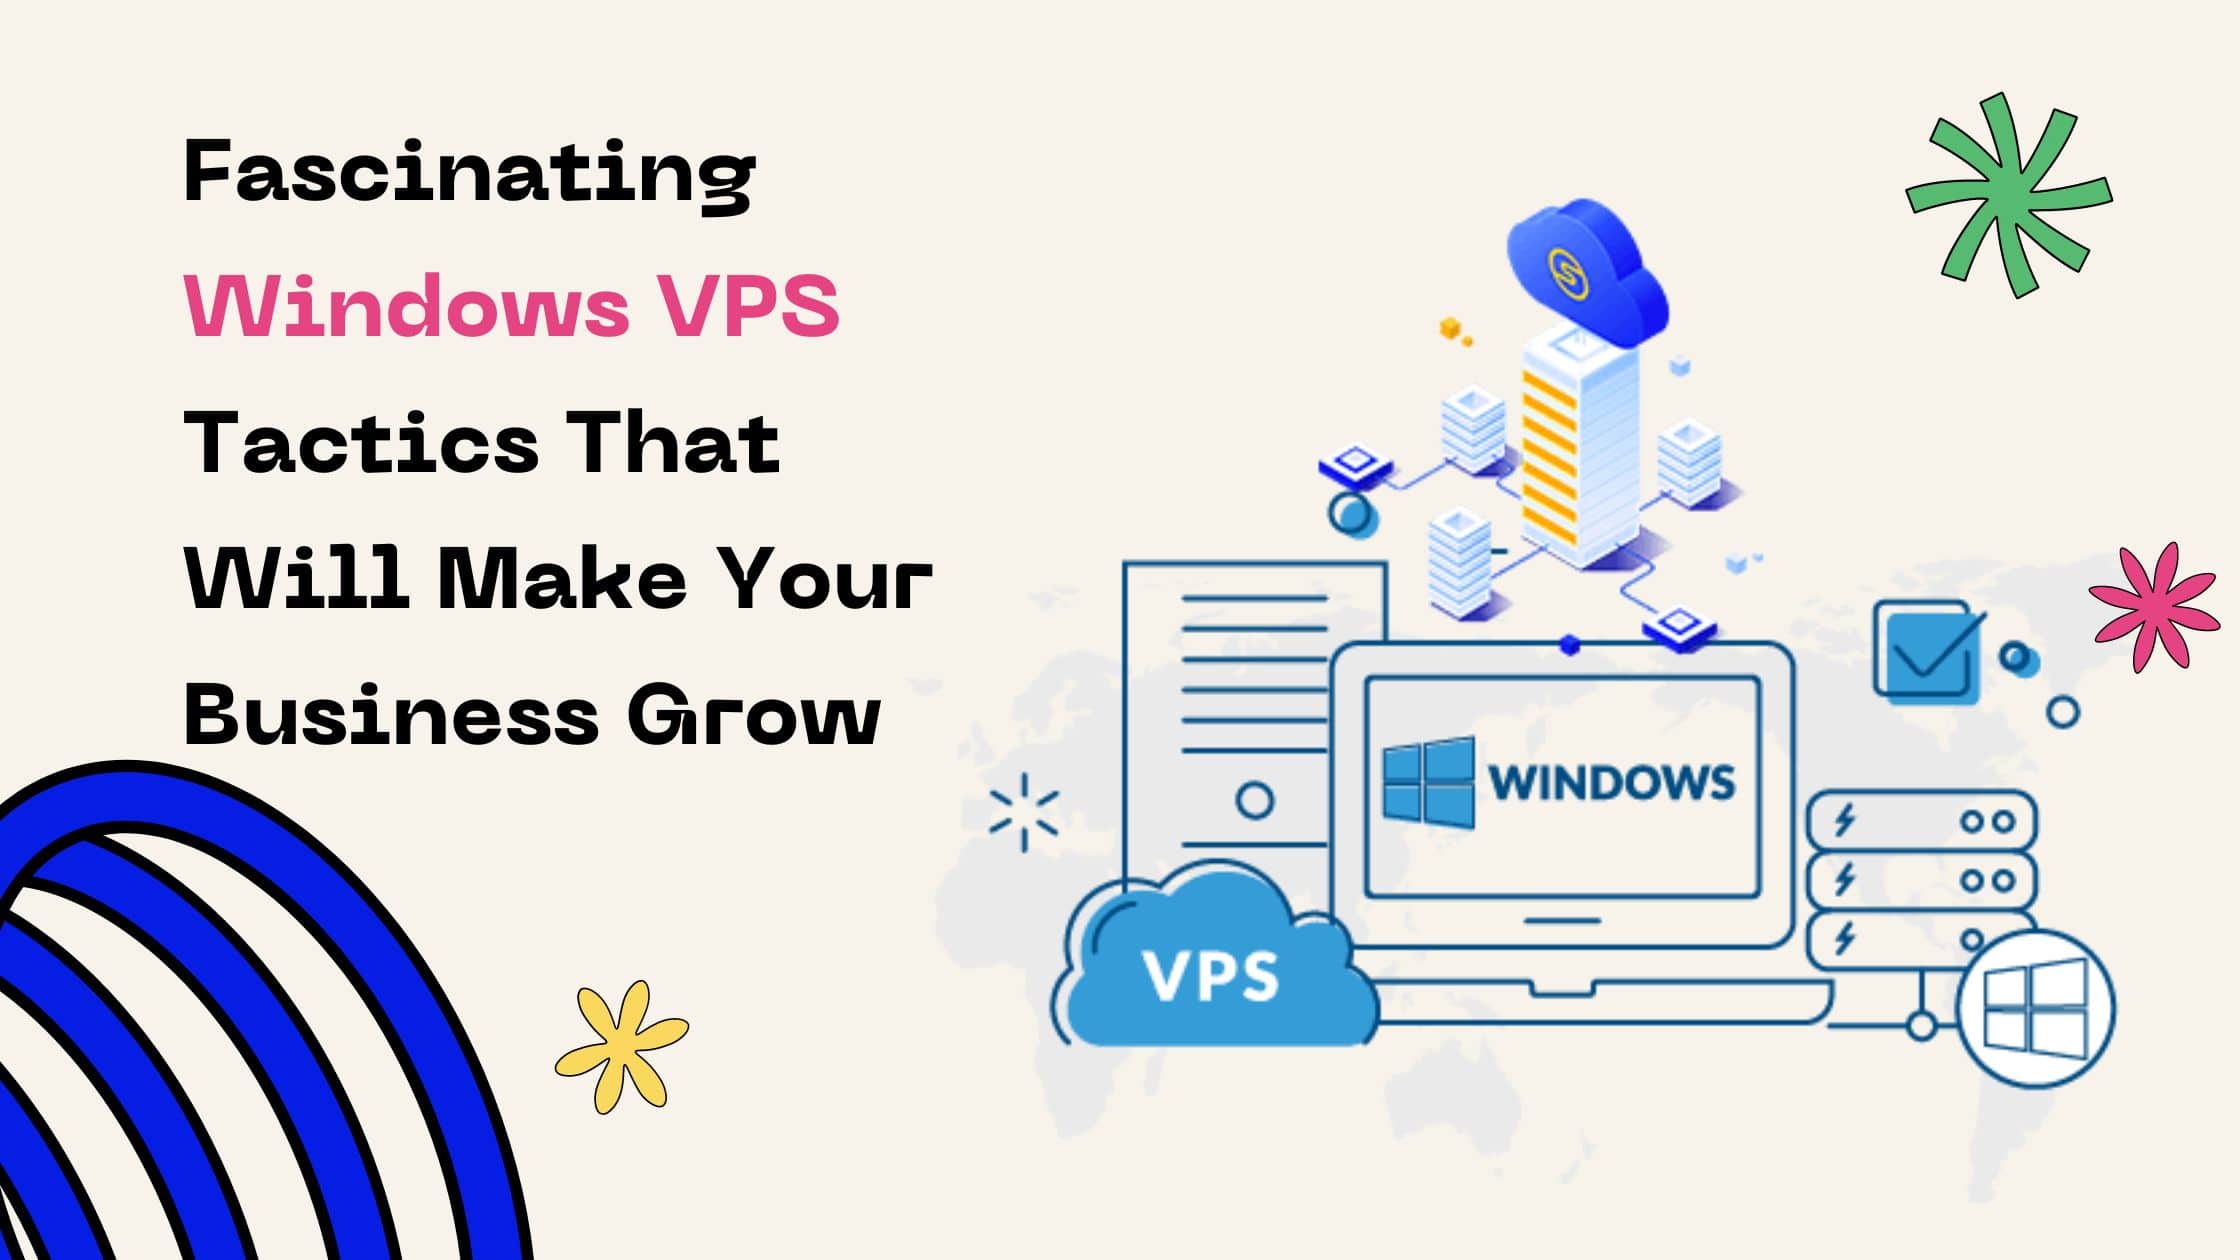 Fascinating Windows VPS tactics that will make your business grow